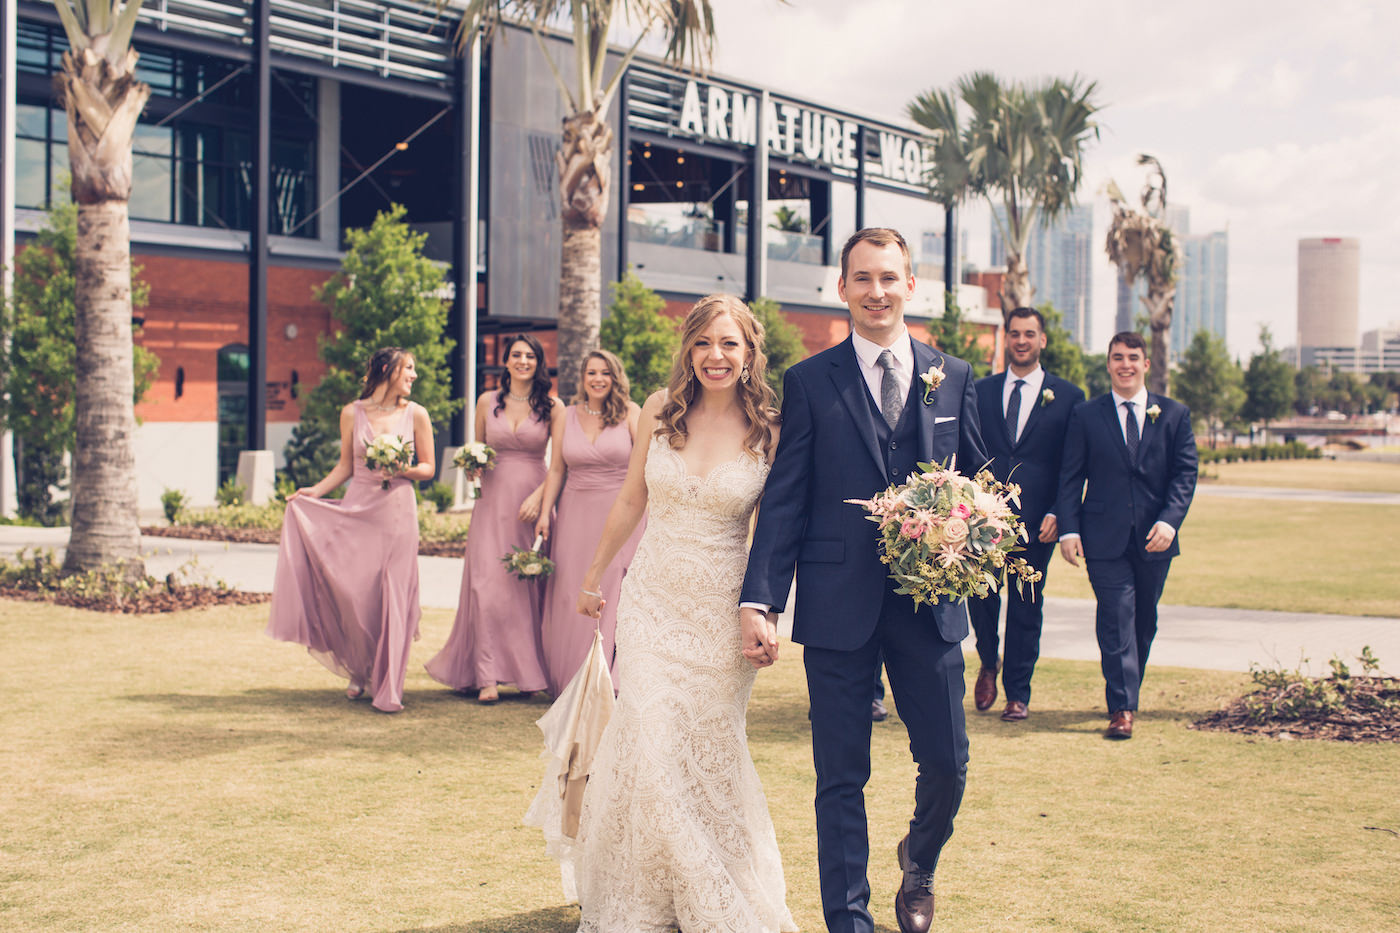 Tampa Wedding Party Outdoor Portraits at Tampa Downtown Historic Venue Armature Works | Dusty Rose Bridesmaid Dresses and Navy Blue Groomsmen Suits | Tampa Wedding Photographer Luxe Light Images